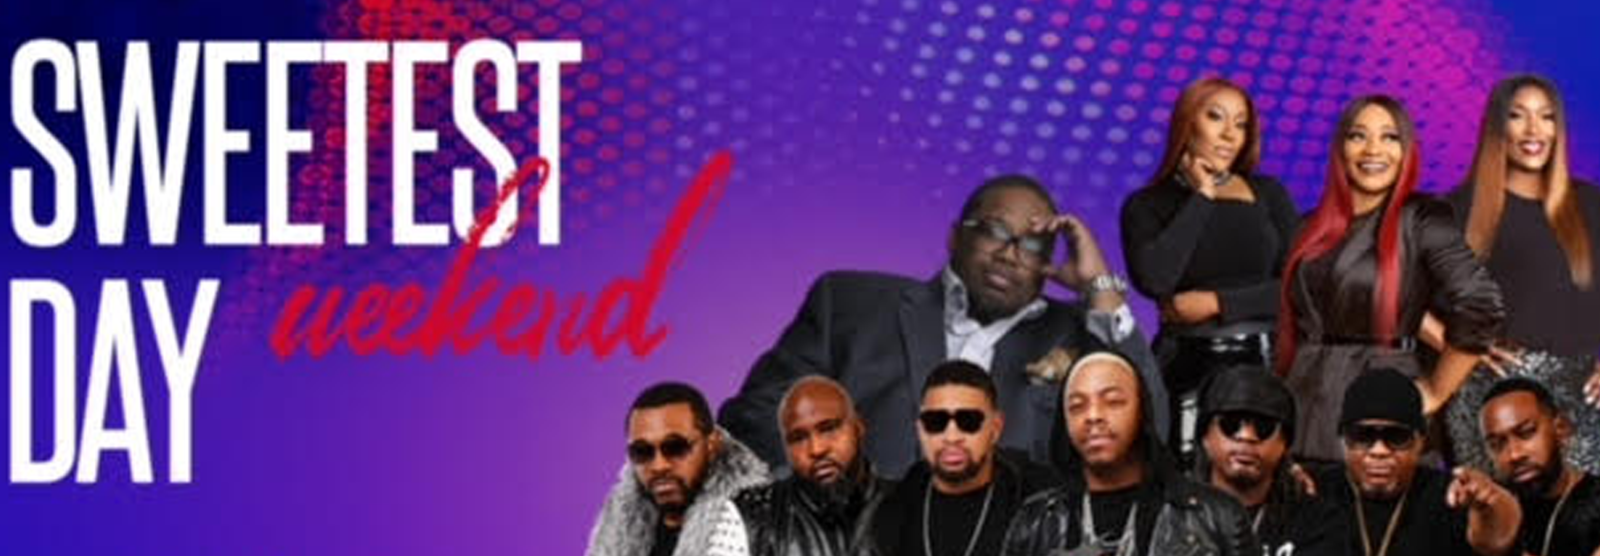 Dru Hill: I Love the 90's - Sweetest Day Concert